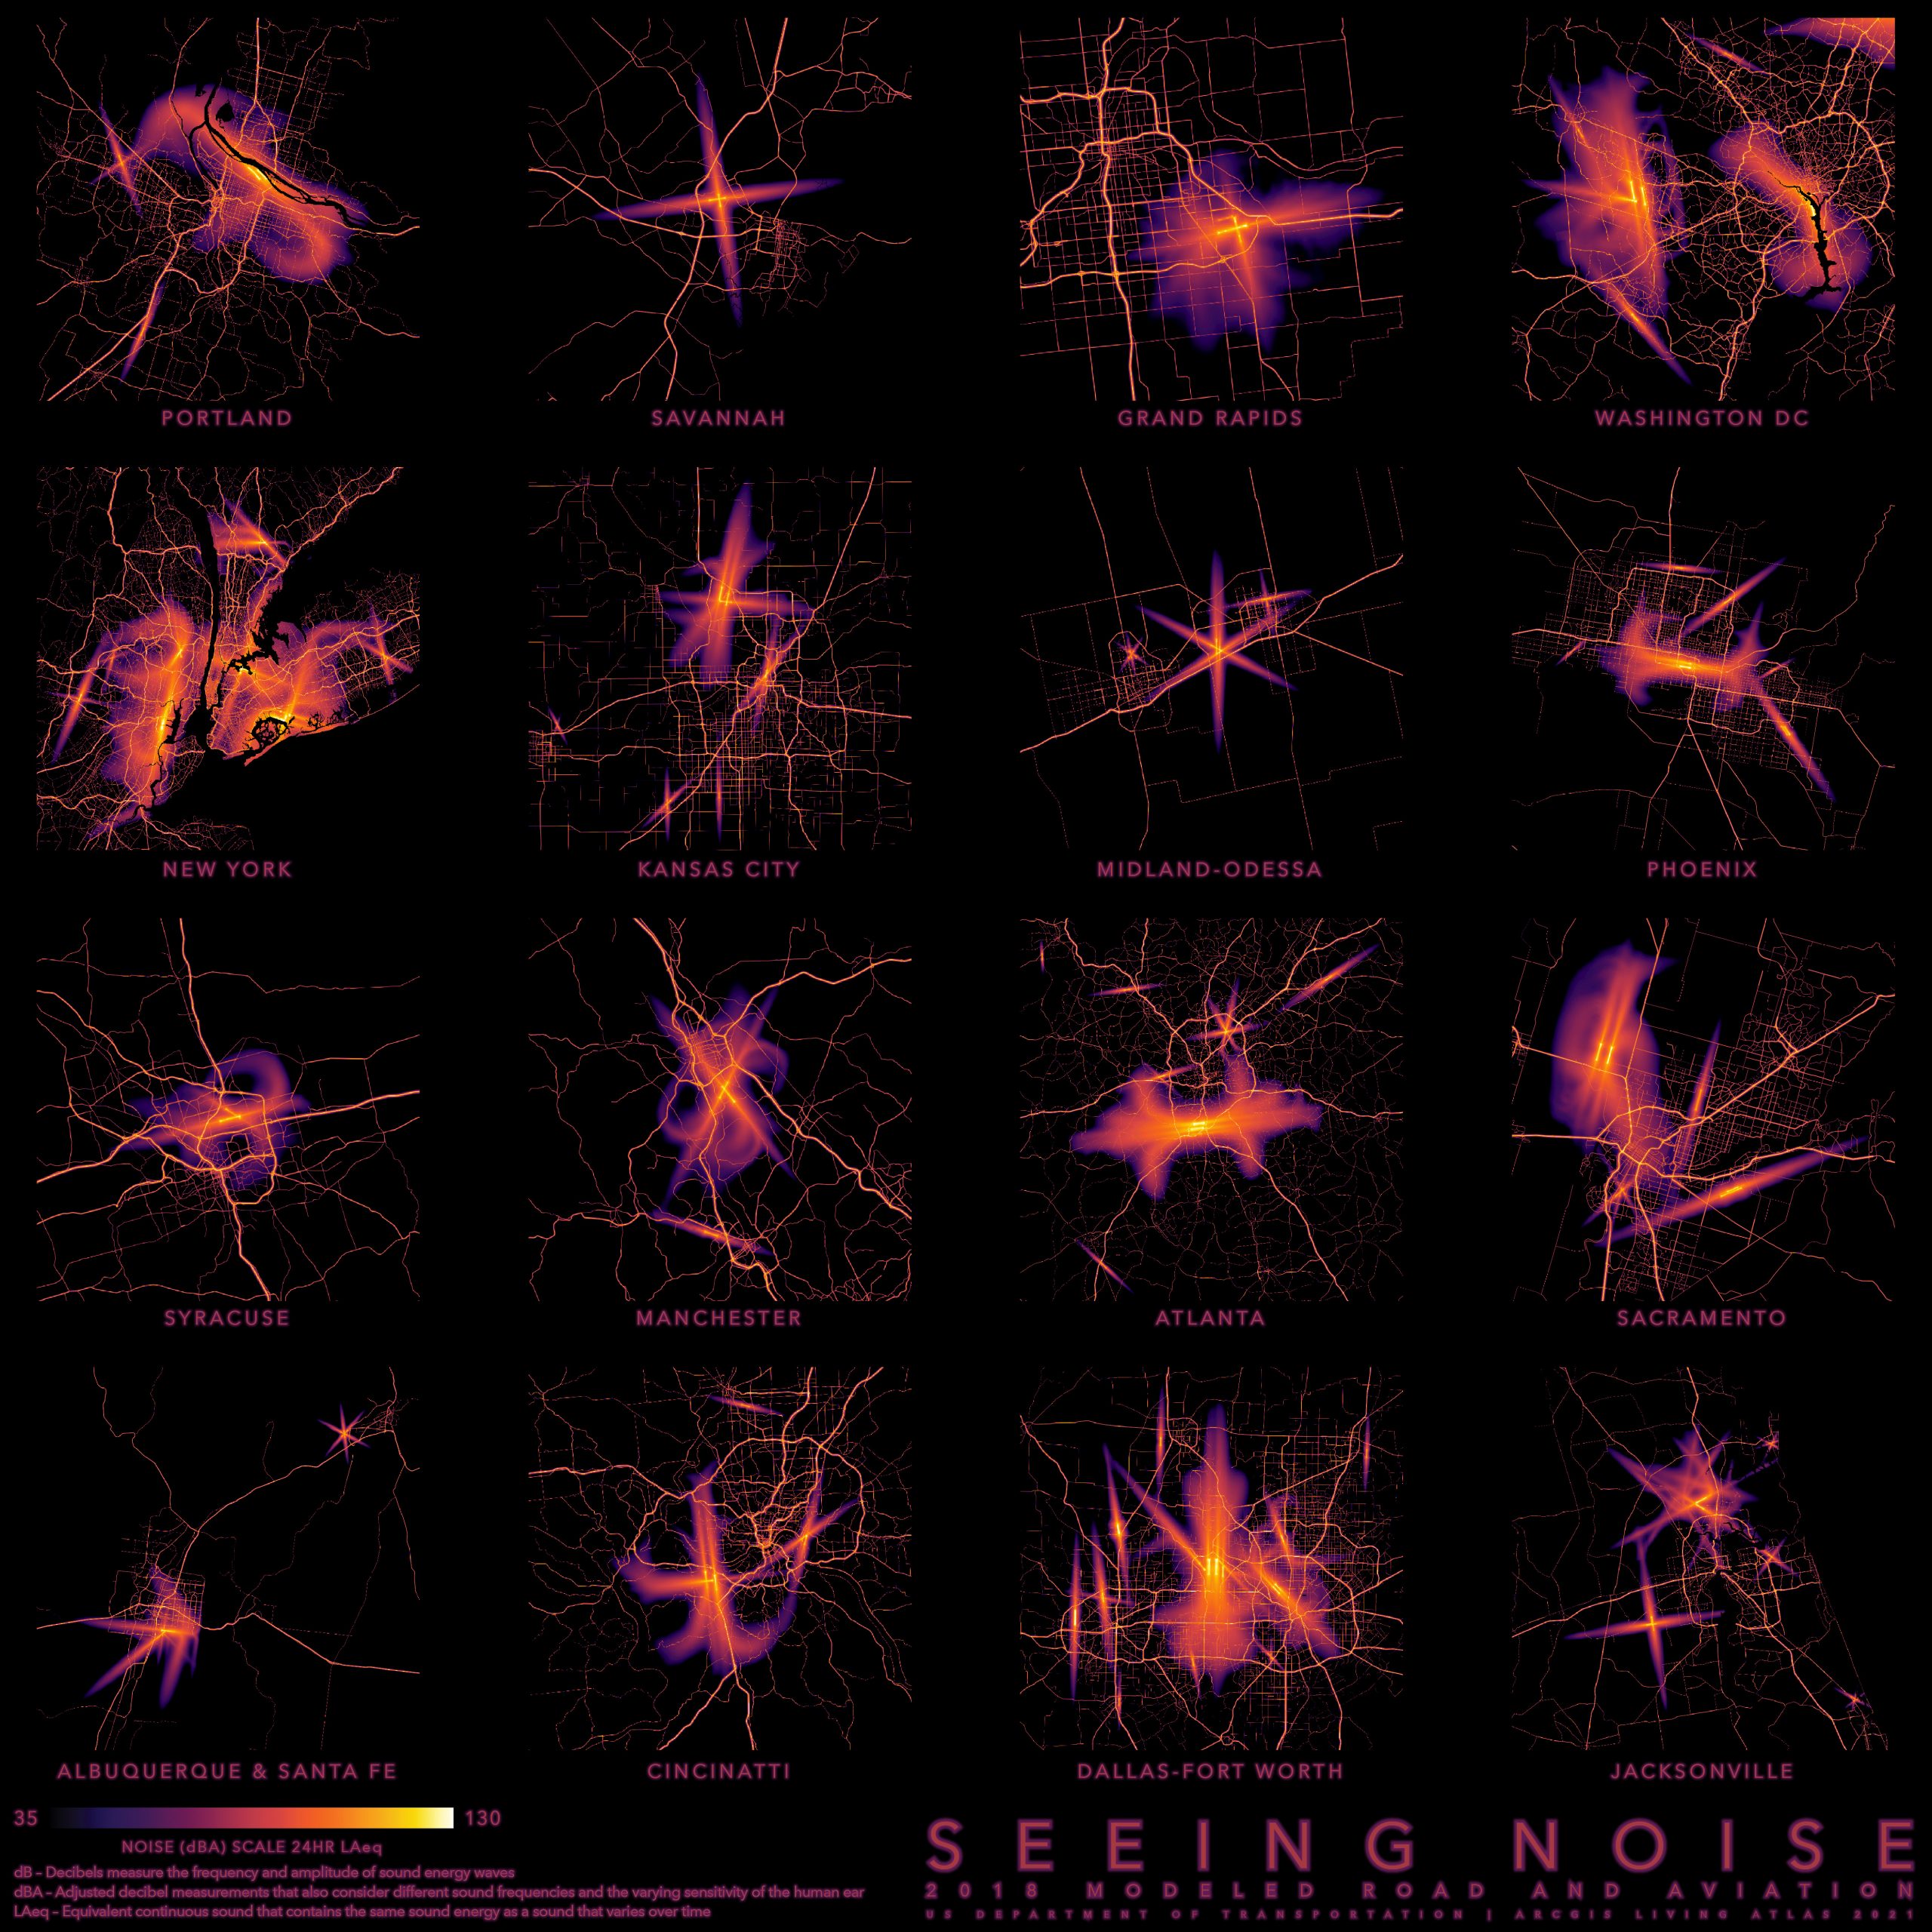 16 cities and their noise patterns